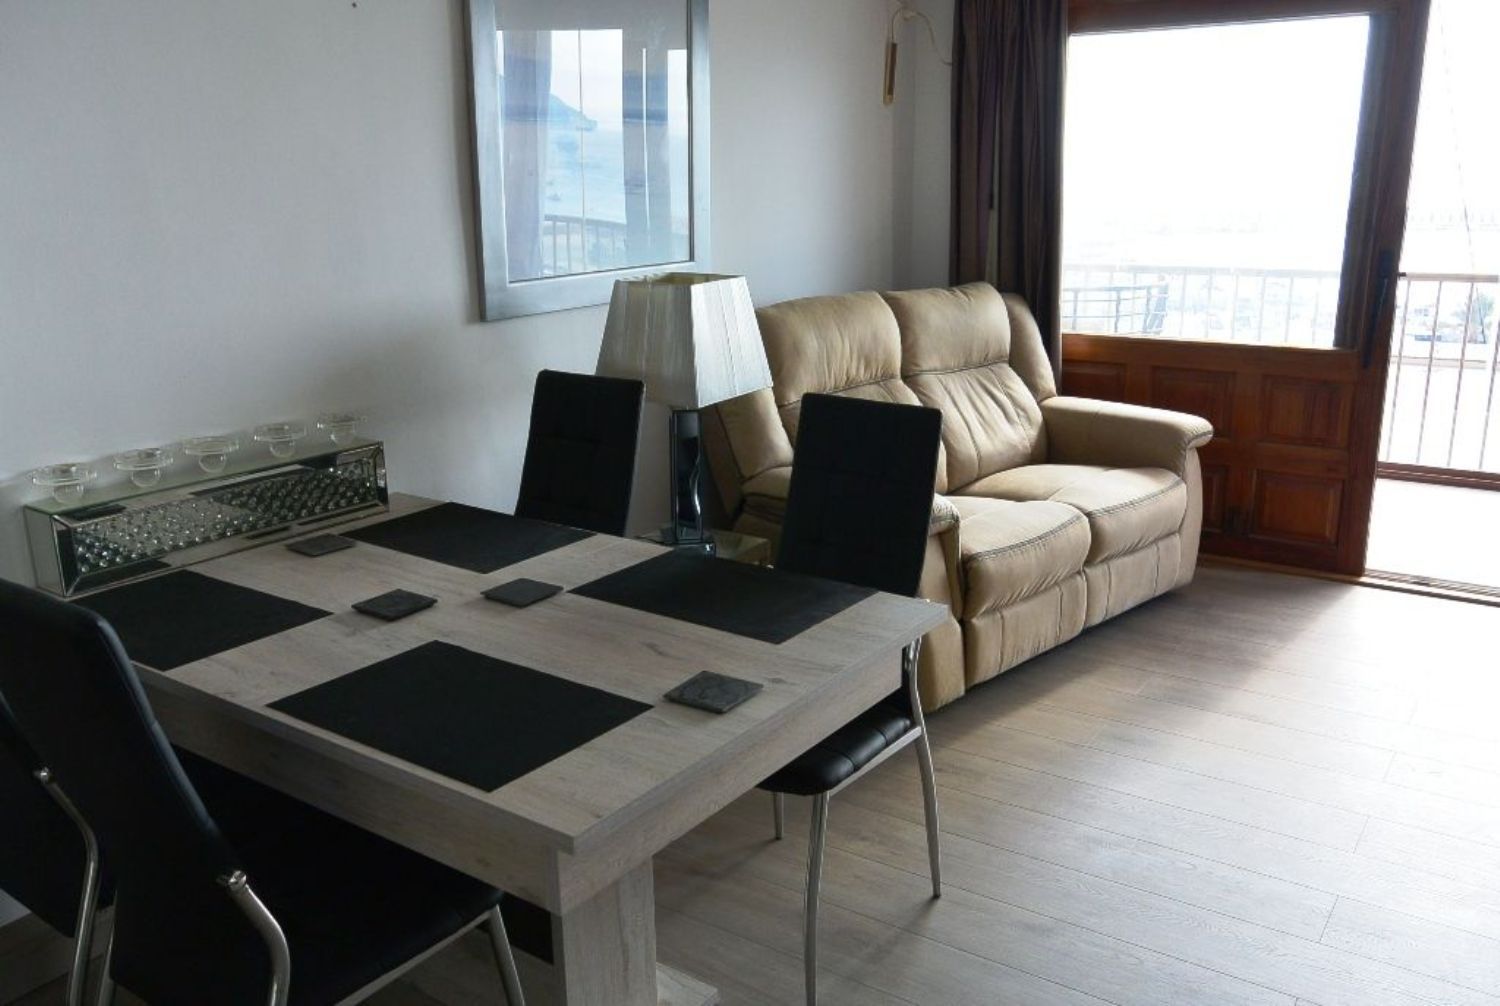 Apartment for sale on the seafront on Avenida del Puerto, in Calpe